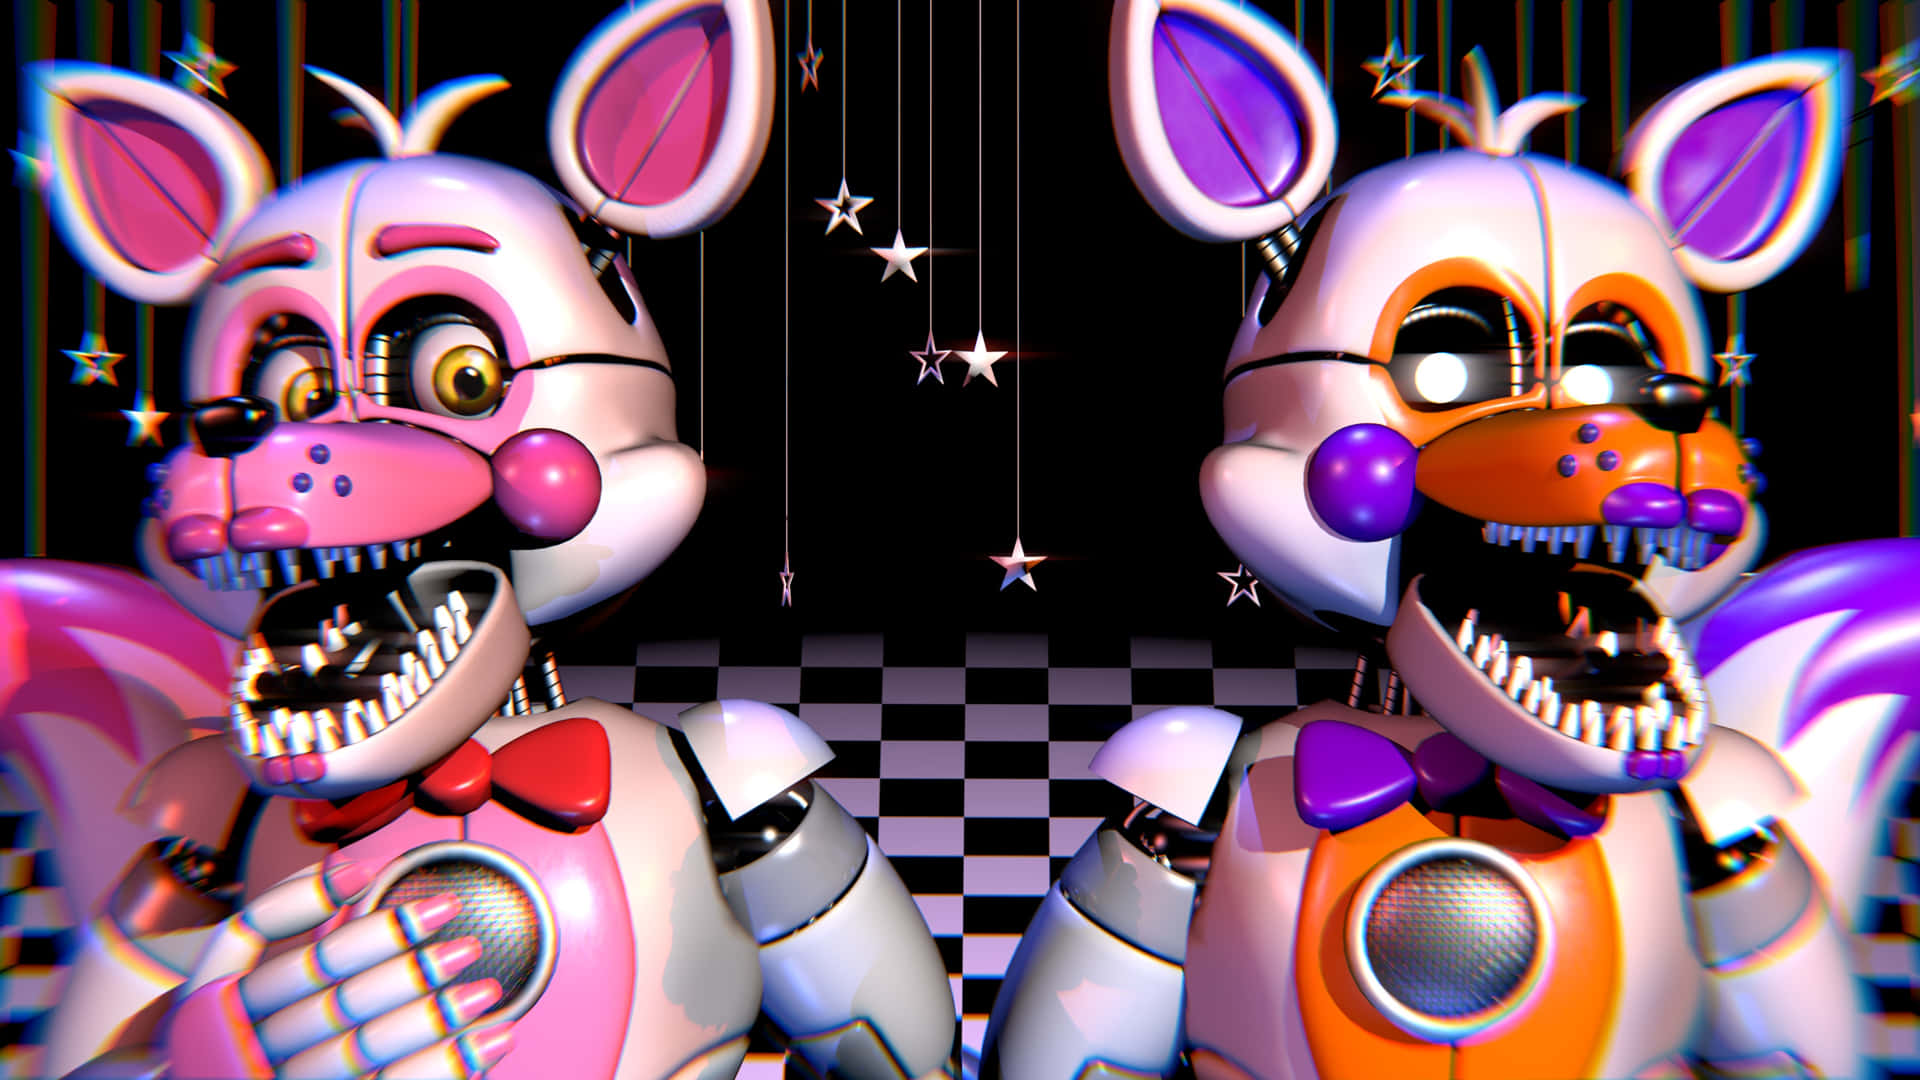 Fnaf Sister Location All Characters Fnaf Sister Location